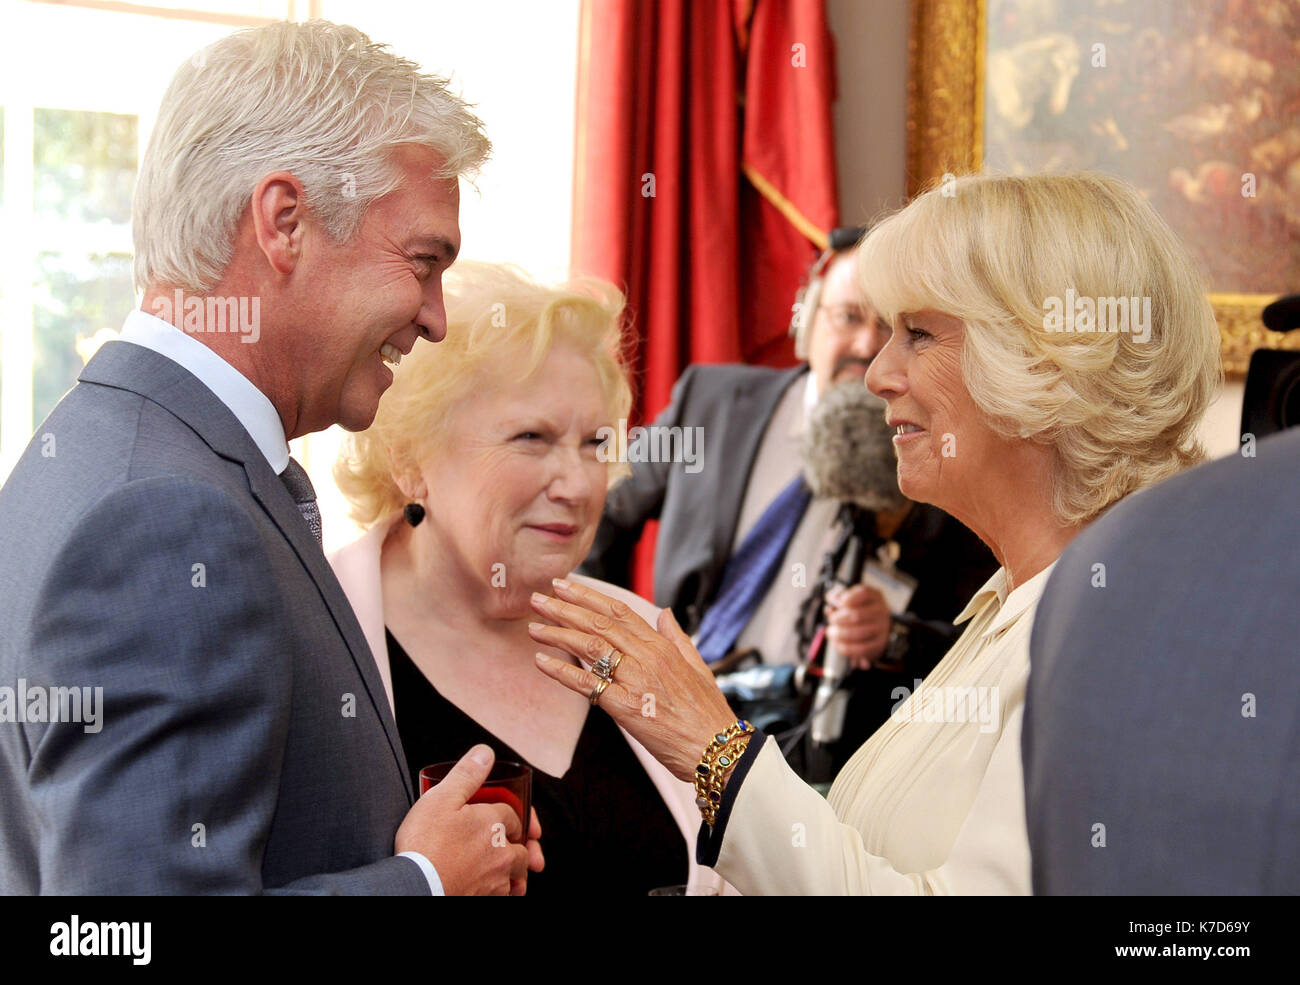 Photo Must Be Credited ©Alpha Press 073074 18/09/12 Camilla The Duchess of Cornwall talks to TV presenter Phillip Schofield and Denise Robertson during a reception for celebrities and volunteers of the Diamond Champions volunteers organised by the Women's Royal Voluntary Service (WRVS), at Clarence House in central London Stock Photo